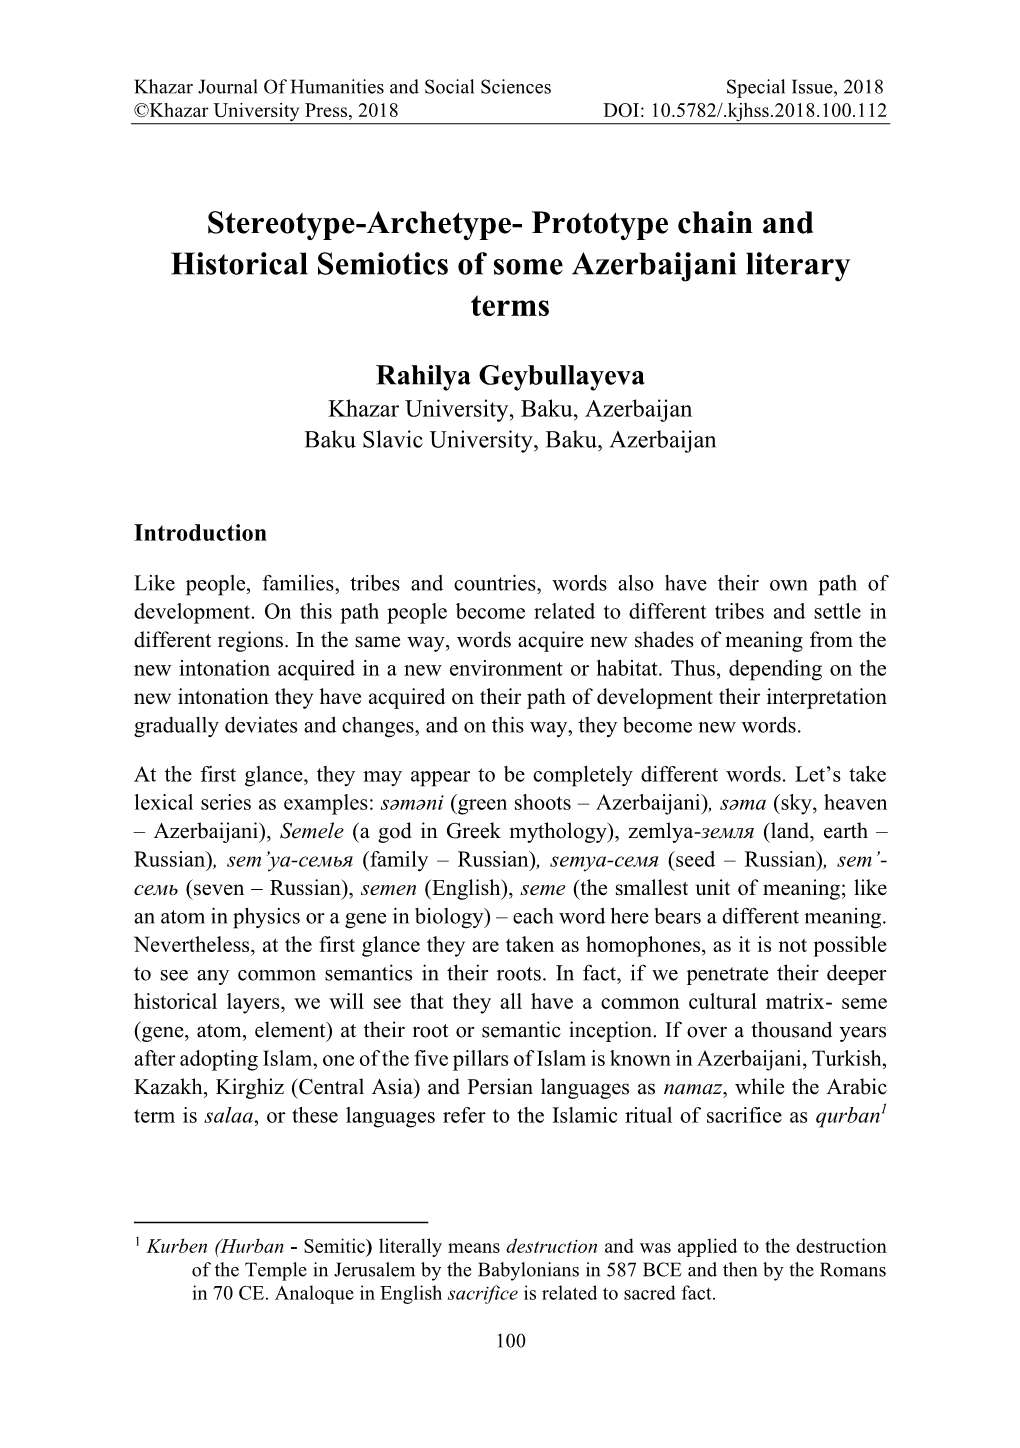 Stereotype-Archetype- Prototype Chain and Historical Semiotics of Some Azerbaijani Literary Terms